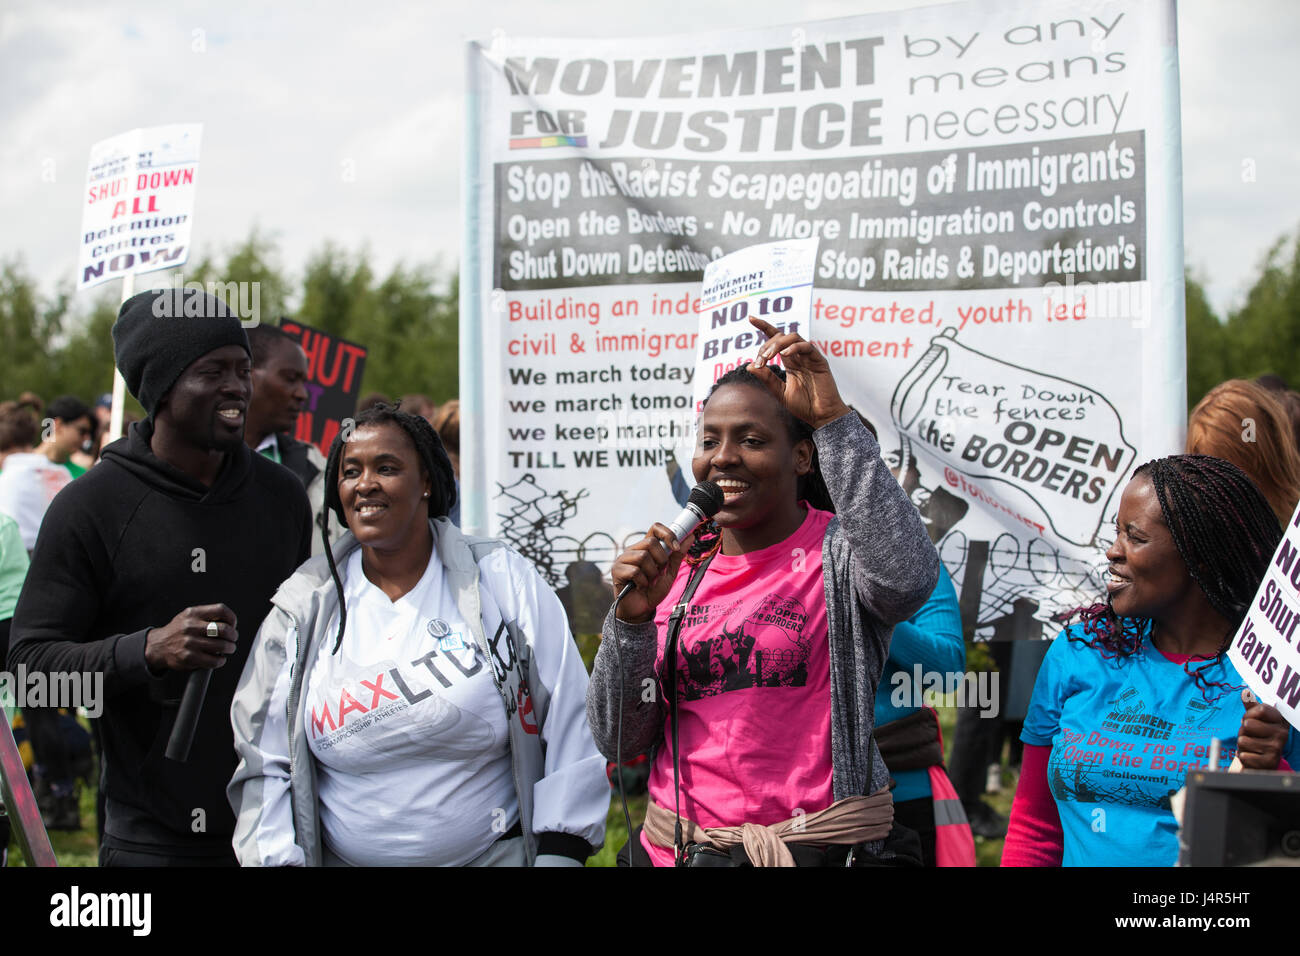 Milton Ernest, UK. 13th May, 2017. Activists from Movement For Justice By Any Means Necessary address a large protest outside Yarl's Wood Immigration Removal Centre to call for all immigration detention centres to be closed. Stock Photo